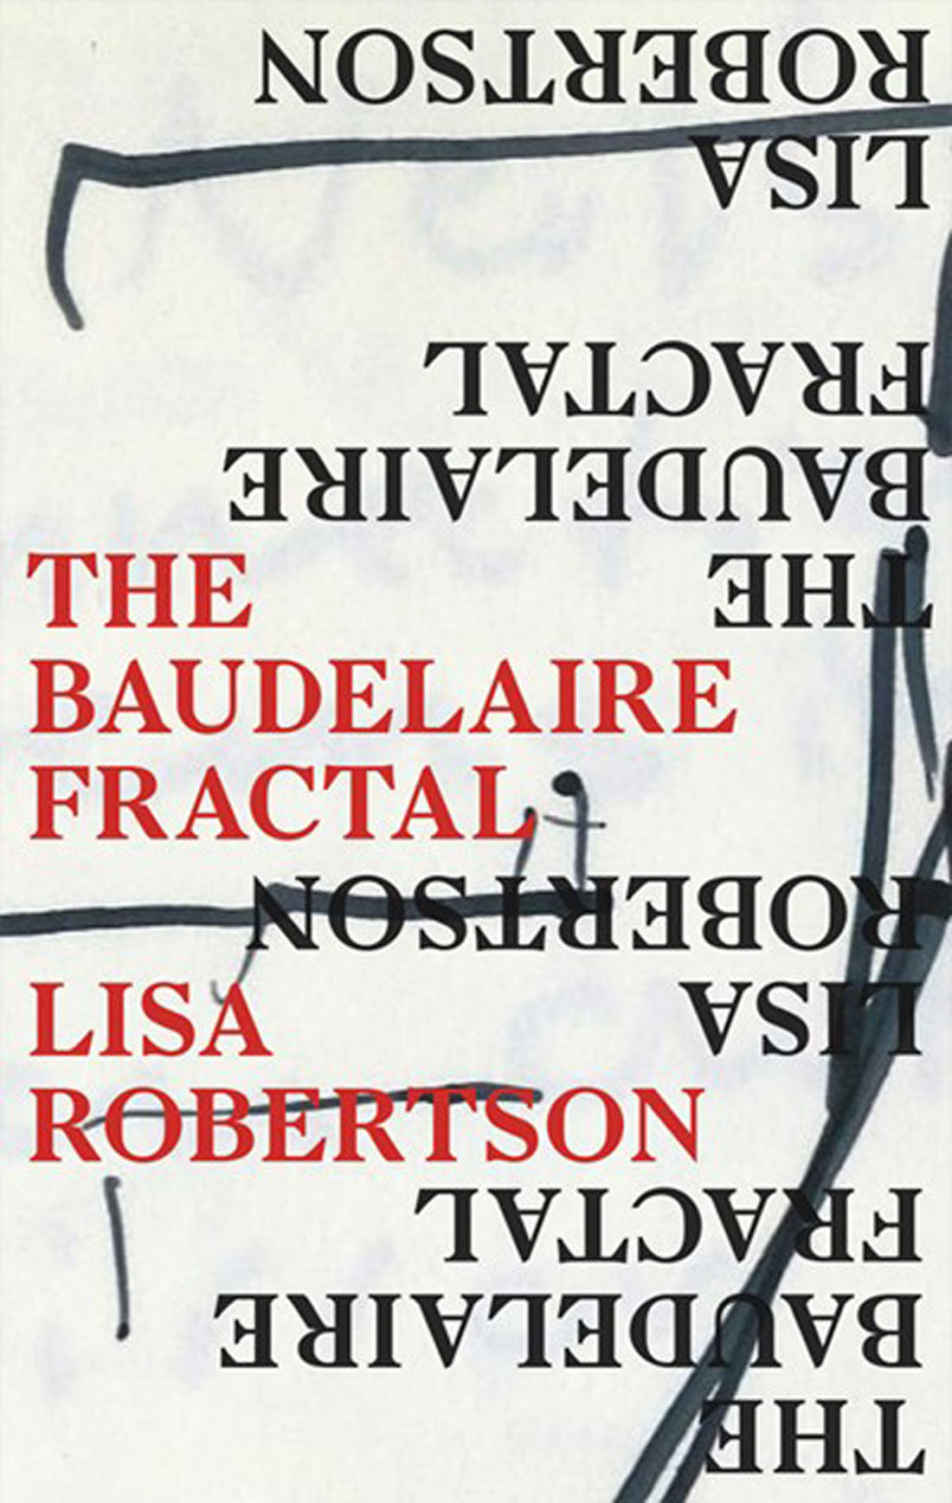 The Baudelaire Fractal by Lisa Robertson